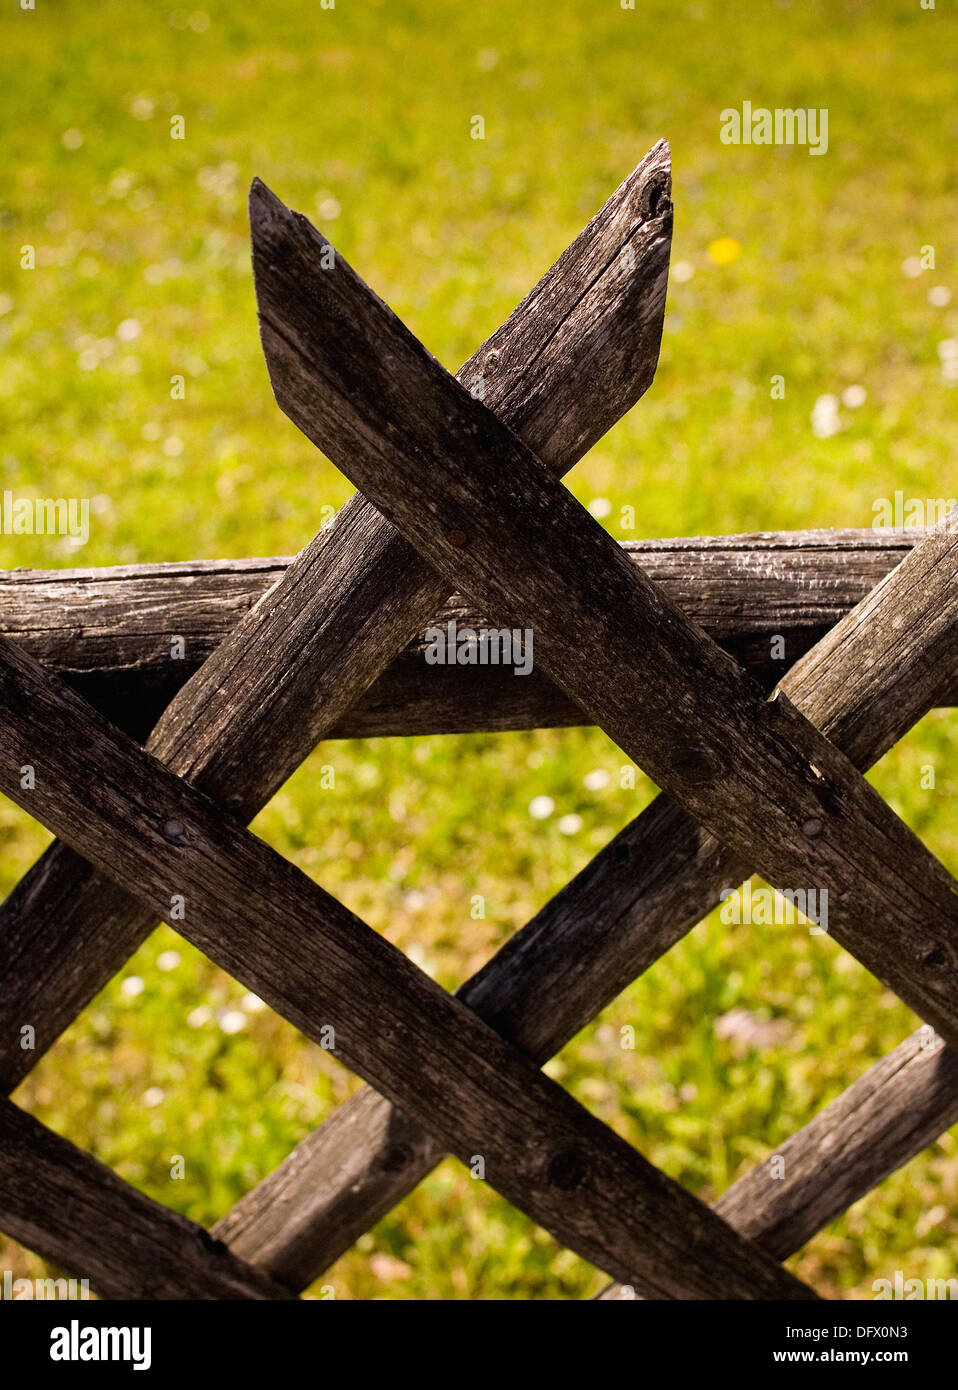 Wood Fence With Criss-Cross Pattern, Close-Up Stock Photo